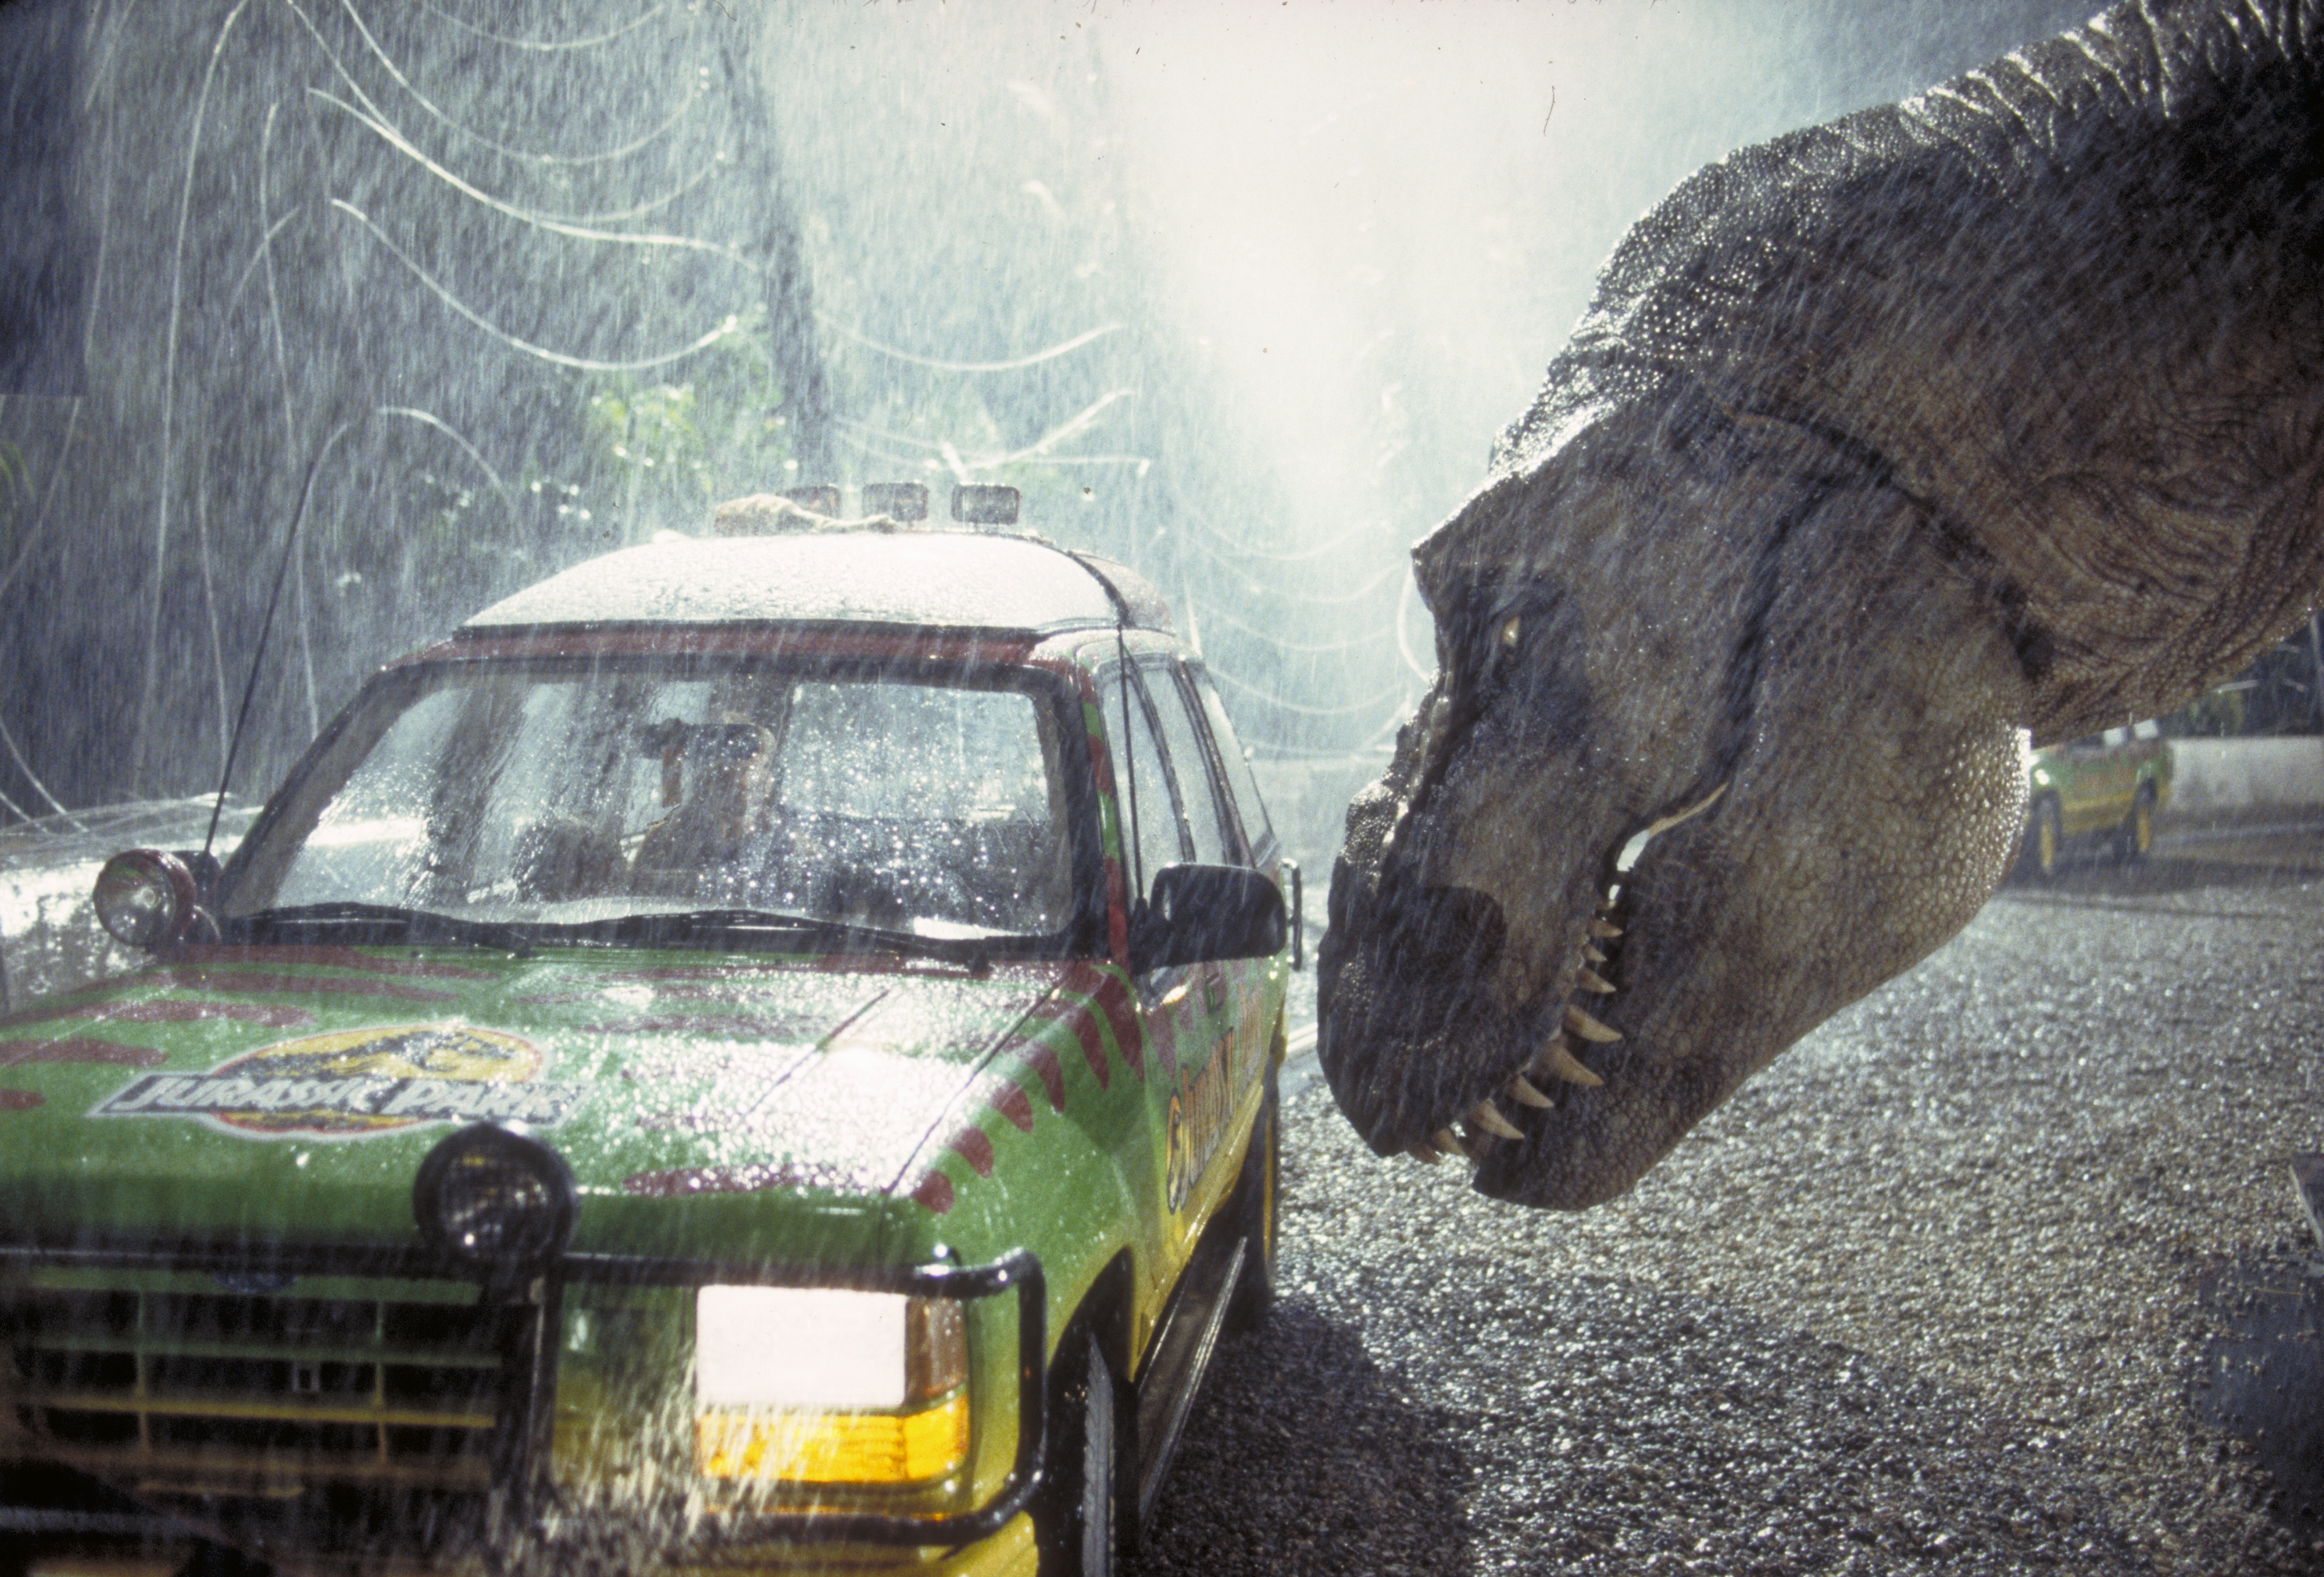 The T-Rex attacks a car in a scene from Jurassic Park